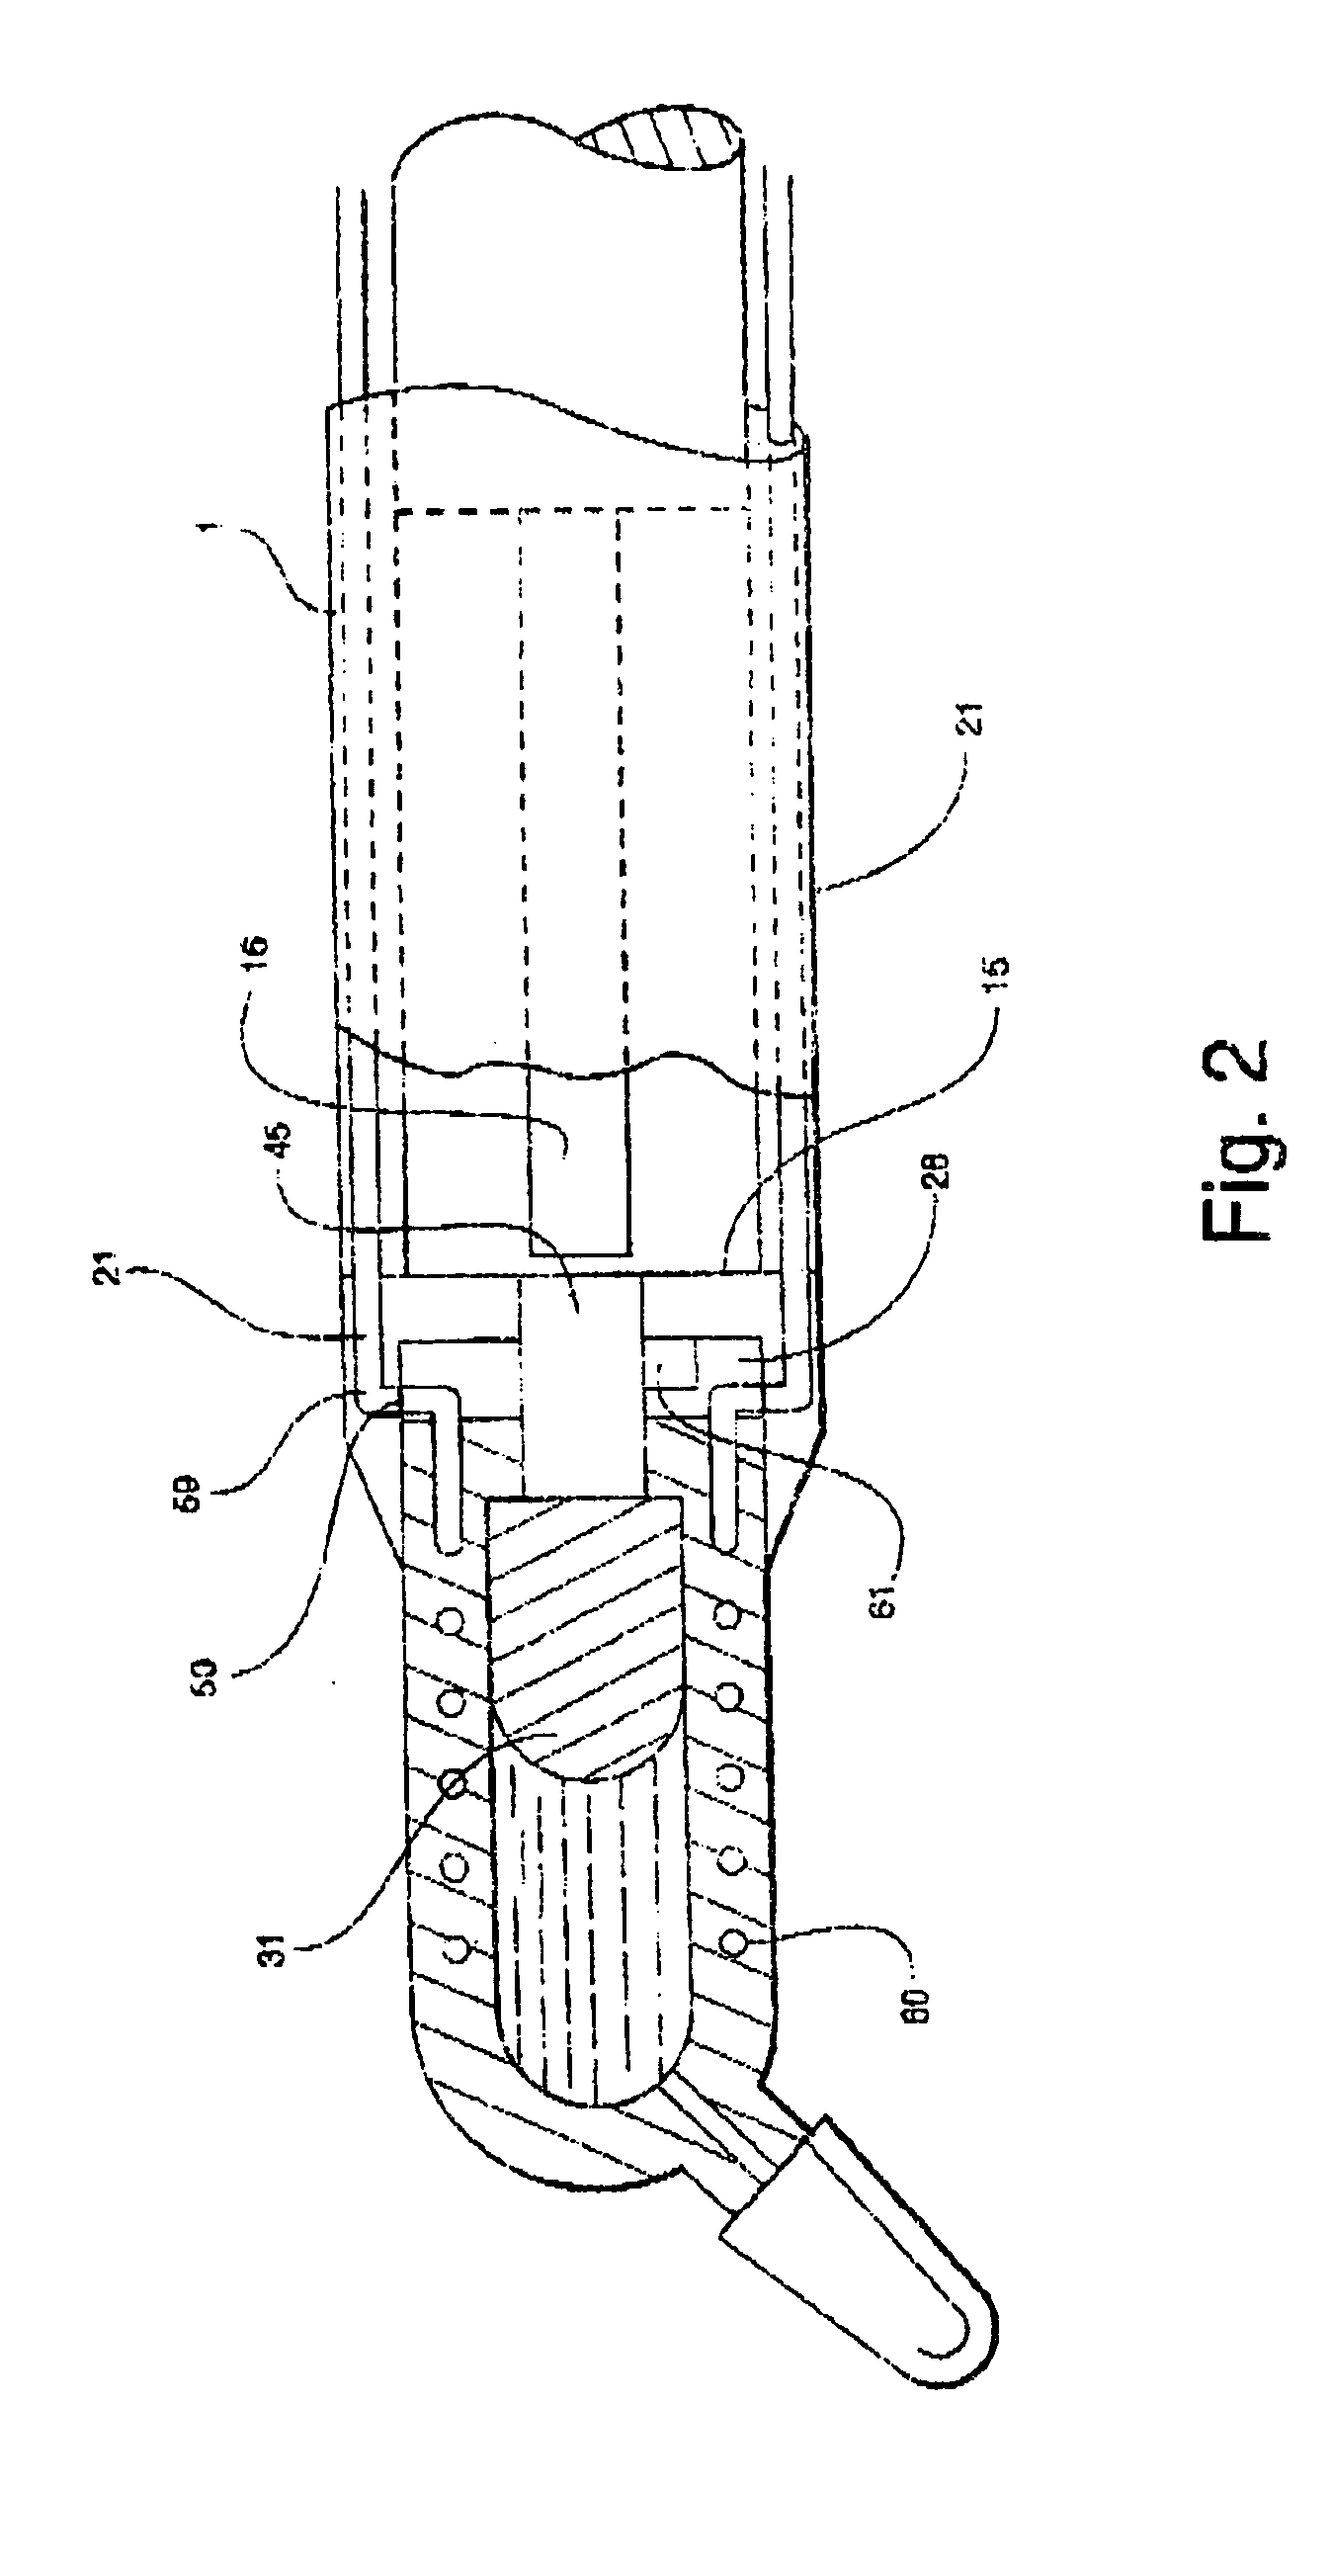 System for dispensing viscous materials